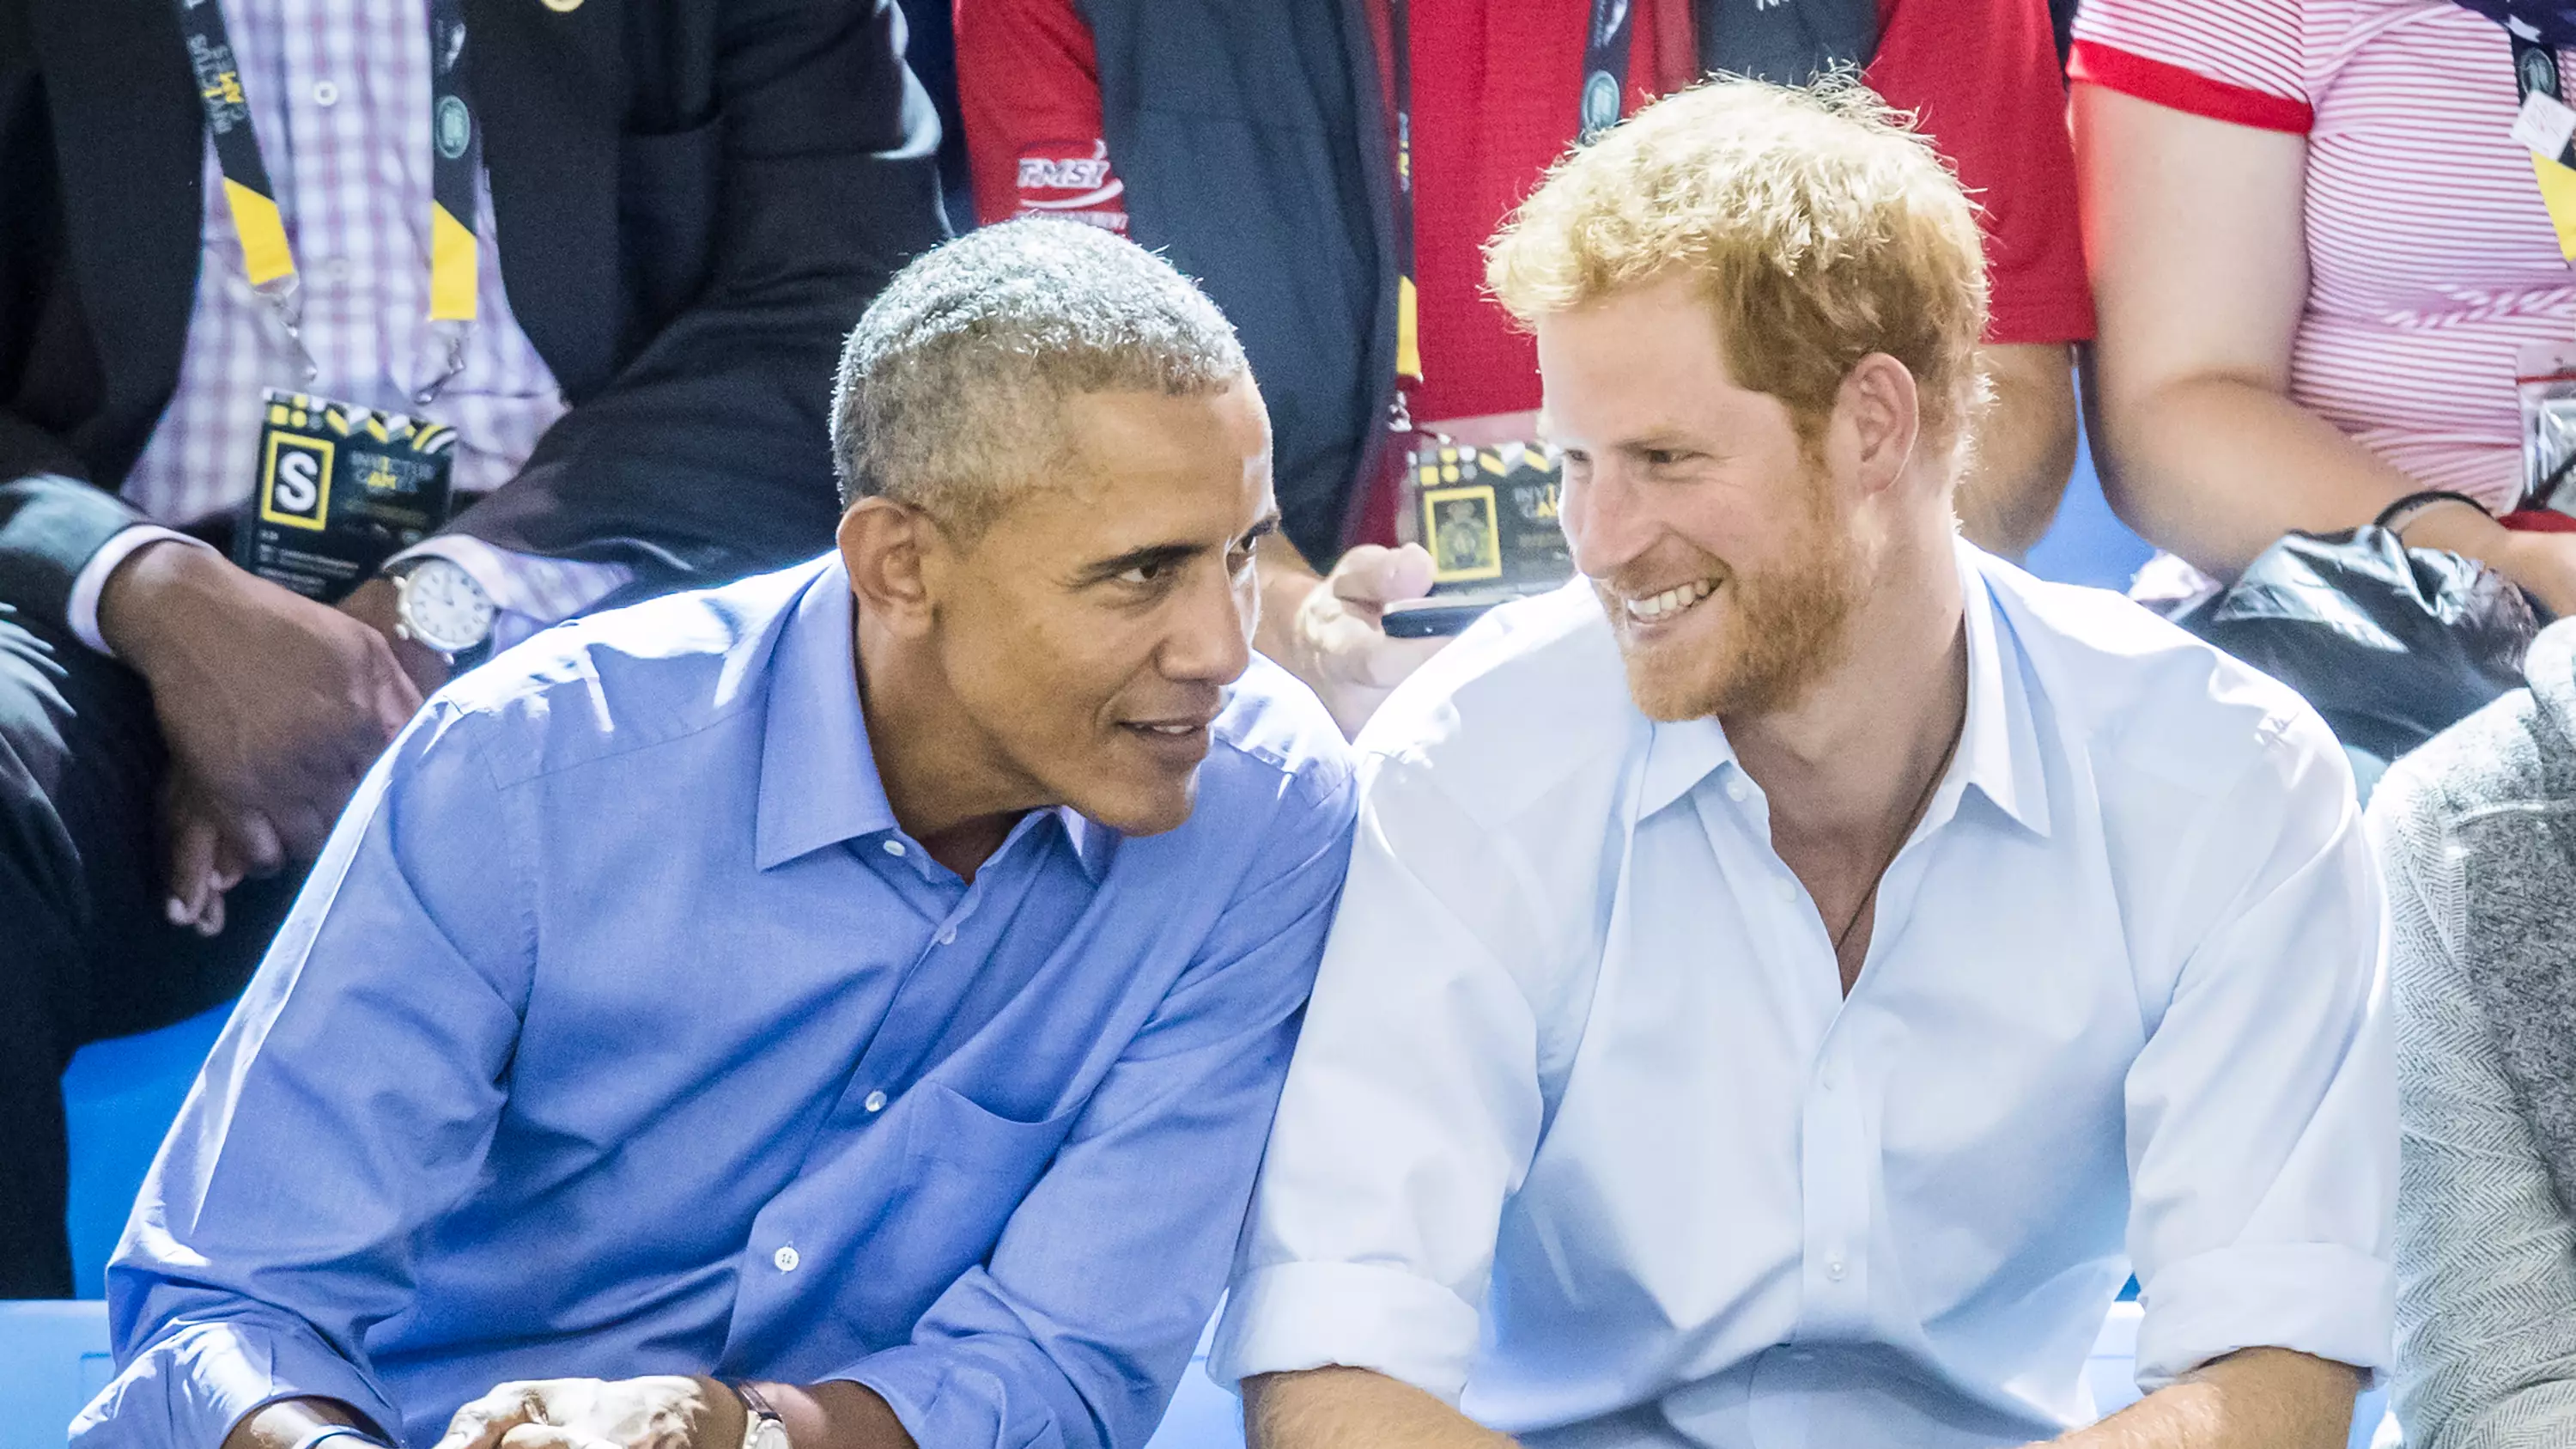 Obama And Prince Harry's Bromance Will Make Your Day 